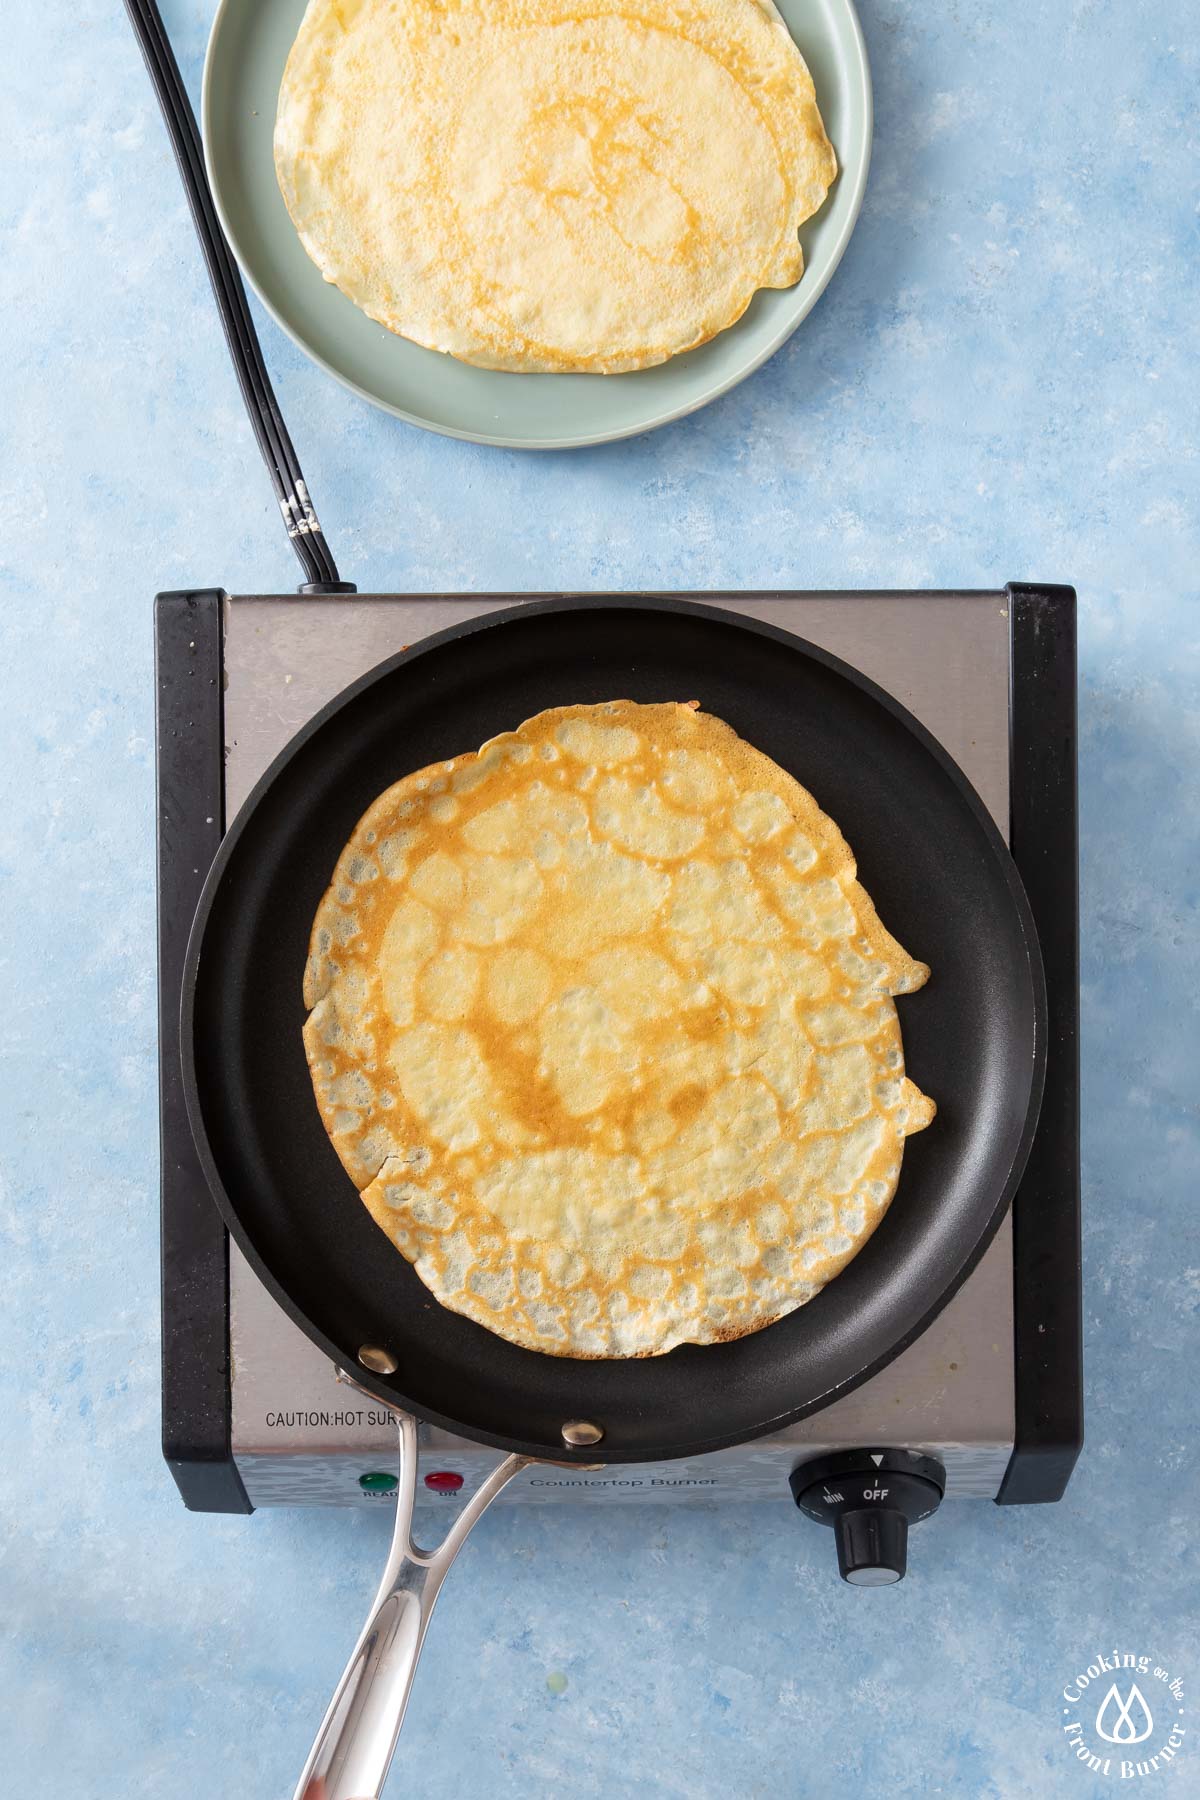 cooked crepe in a pan on burner